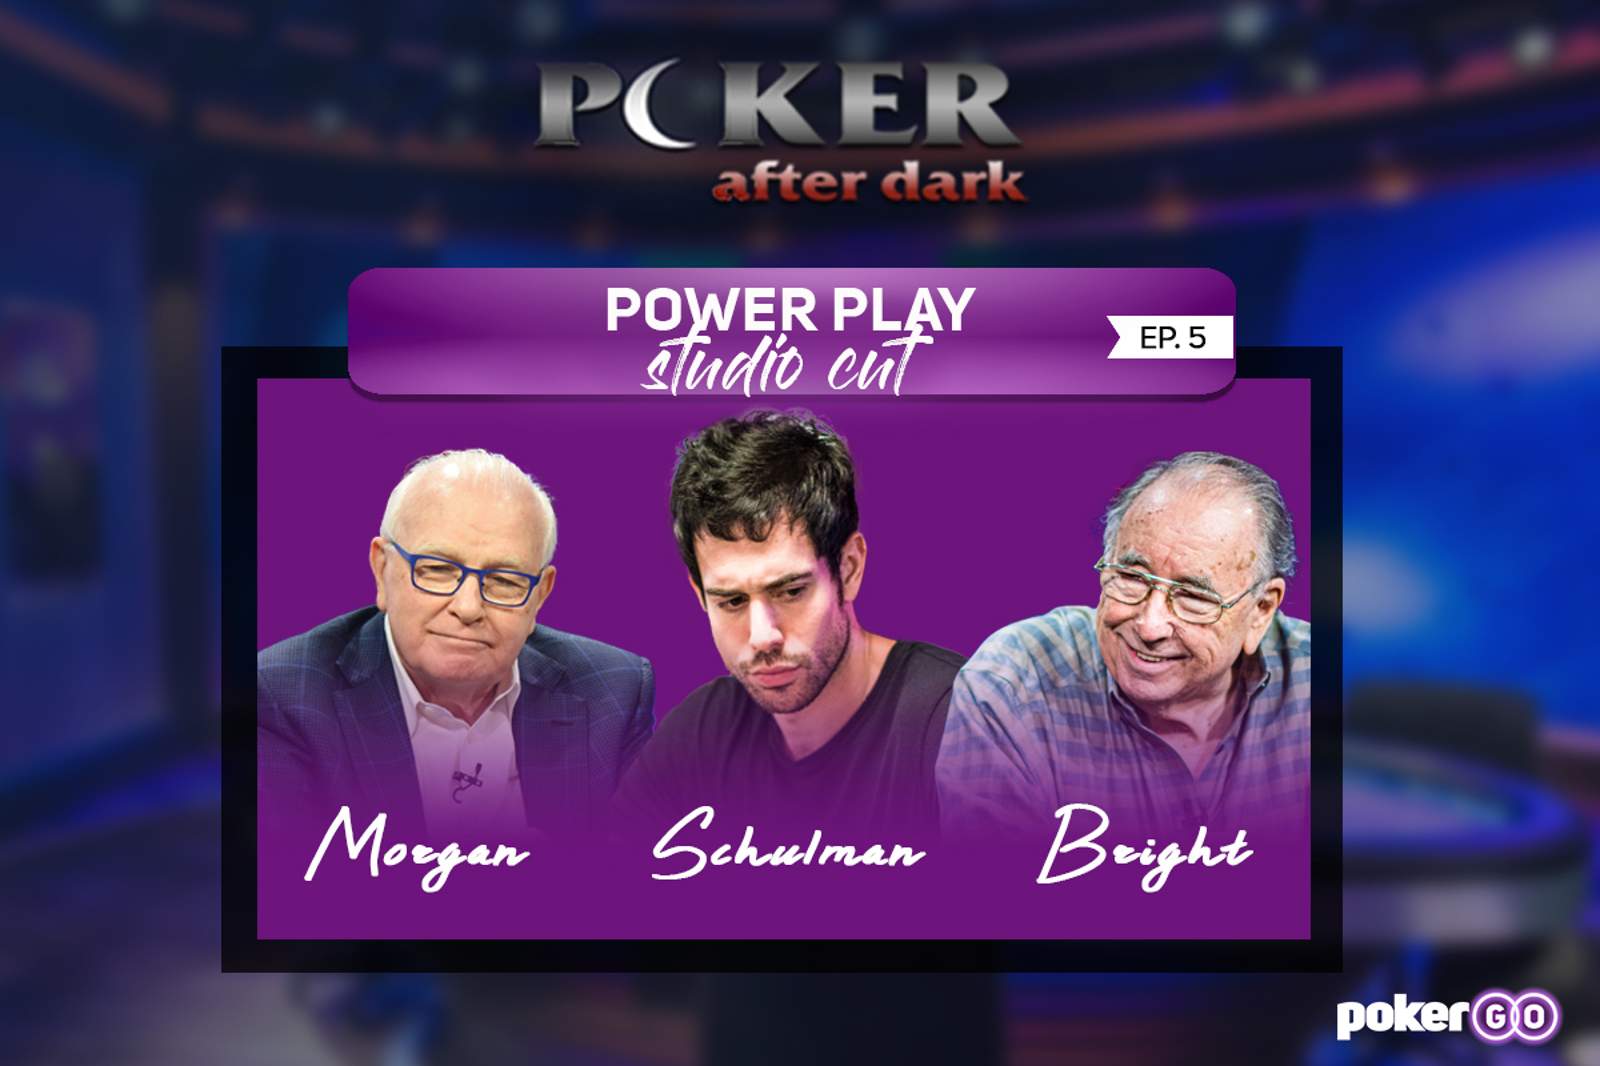 Poker After Dark Power Play Studio Cut Episode 5 on Tonight at 8 p.m. ET